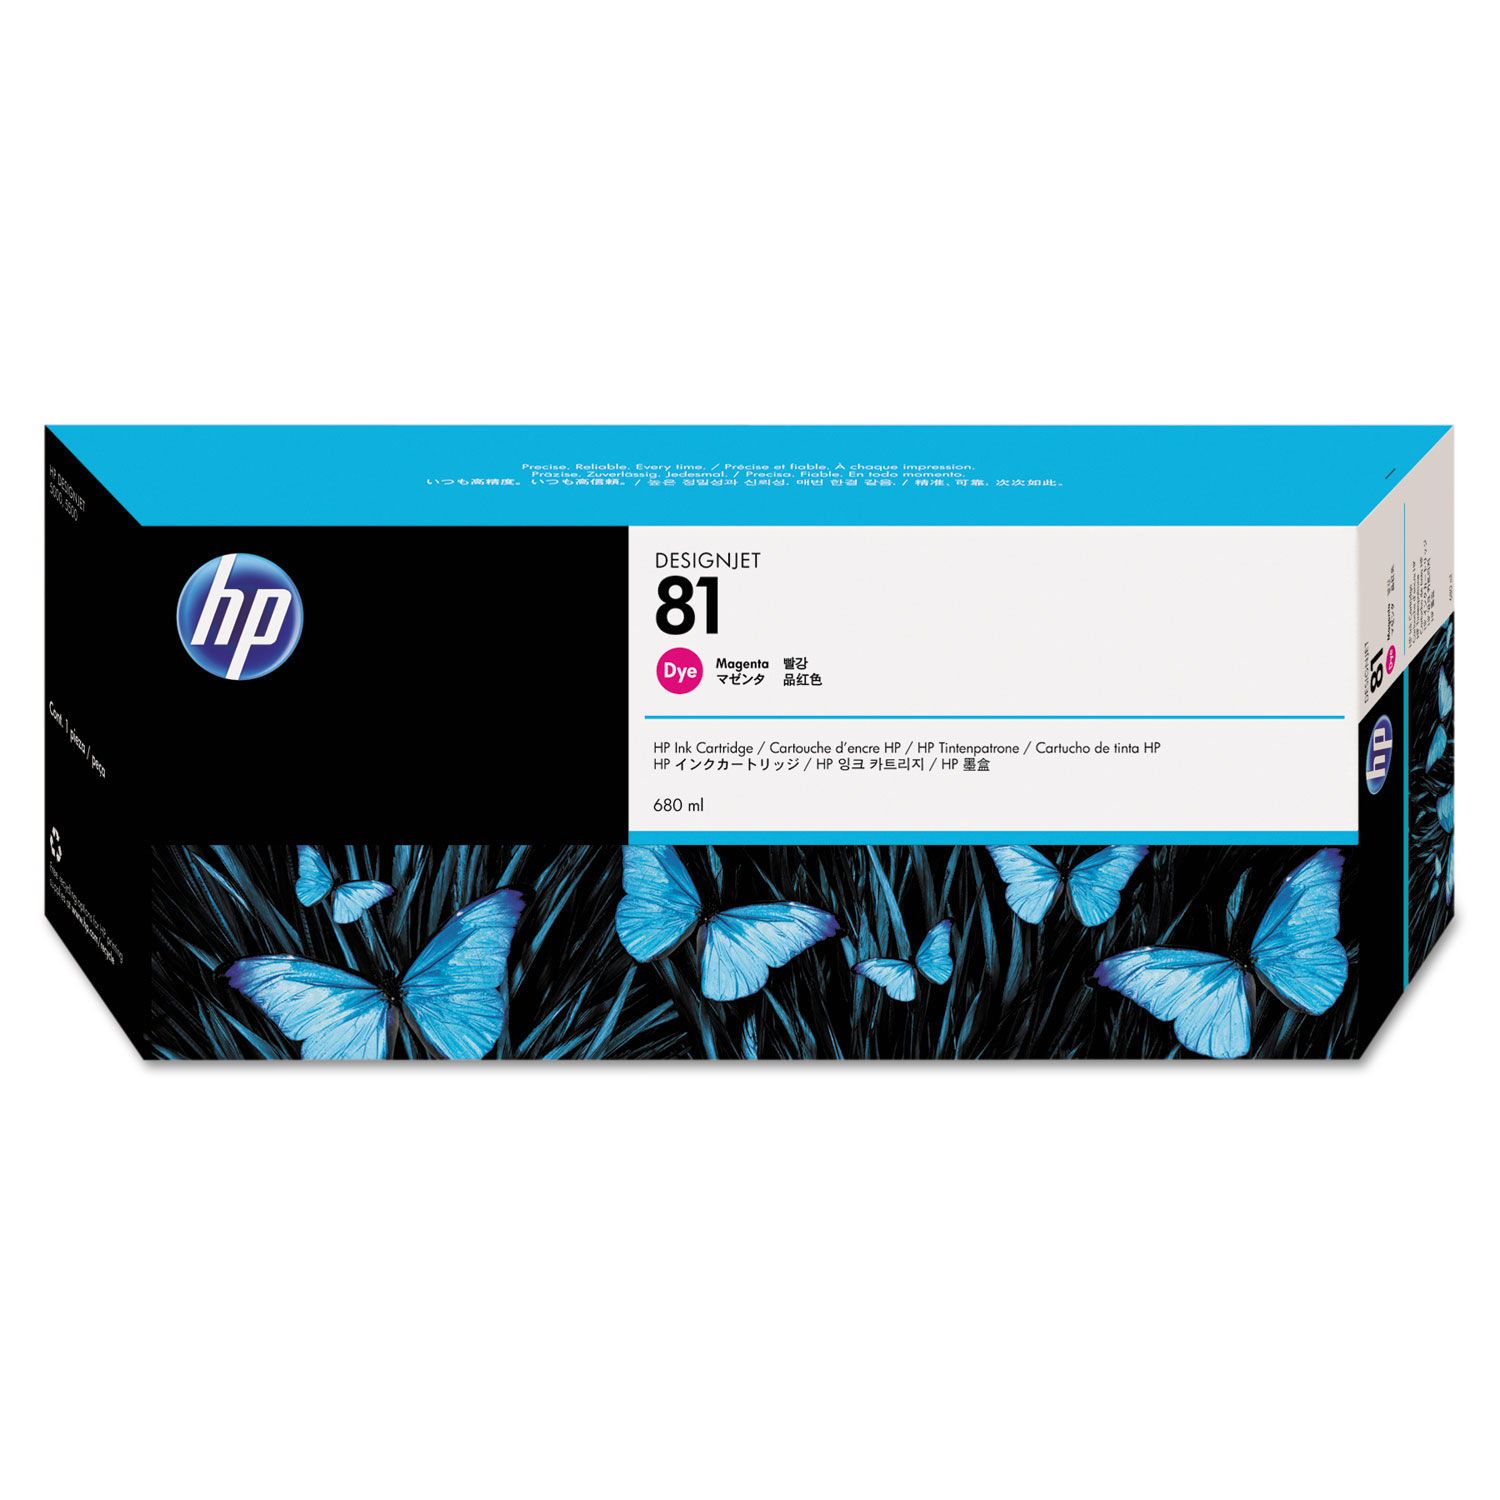 Related to HP DESIGNJET 5000PS: C4932A